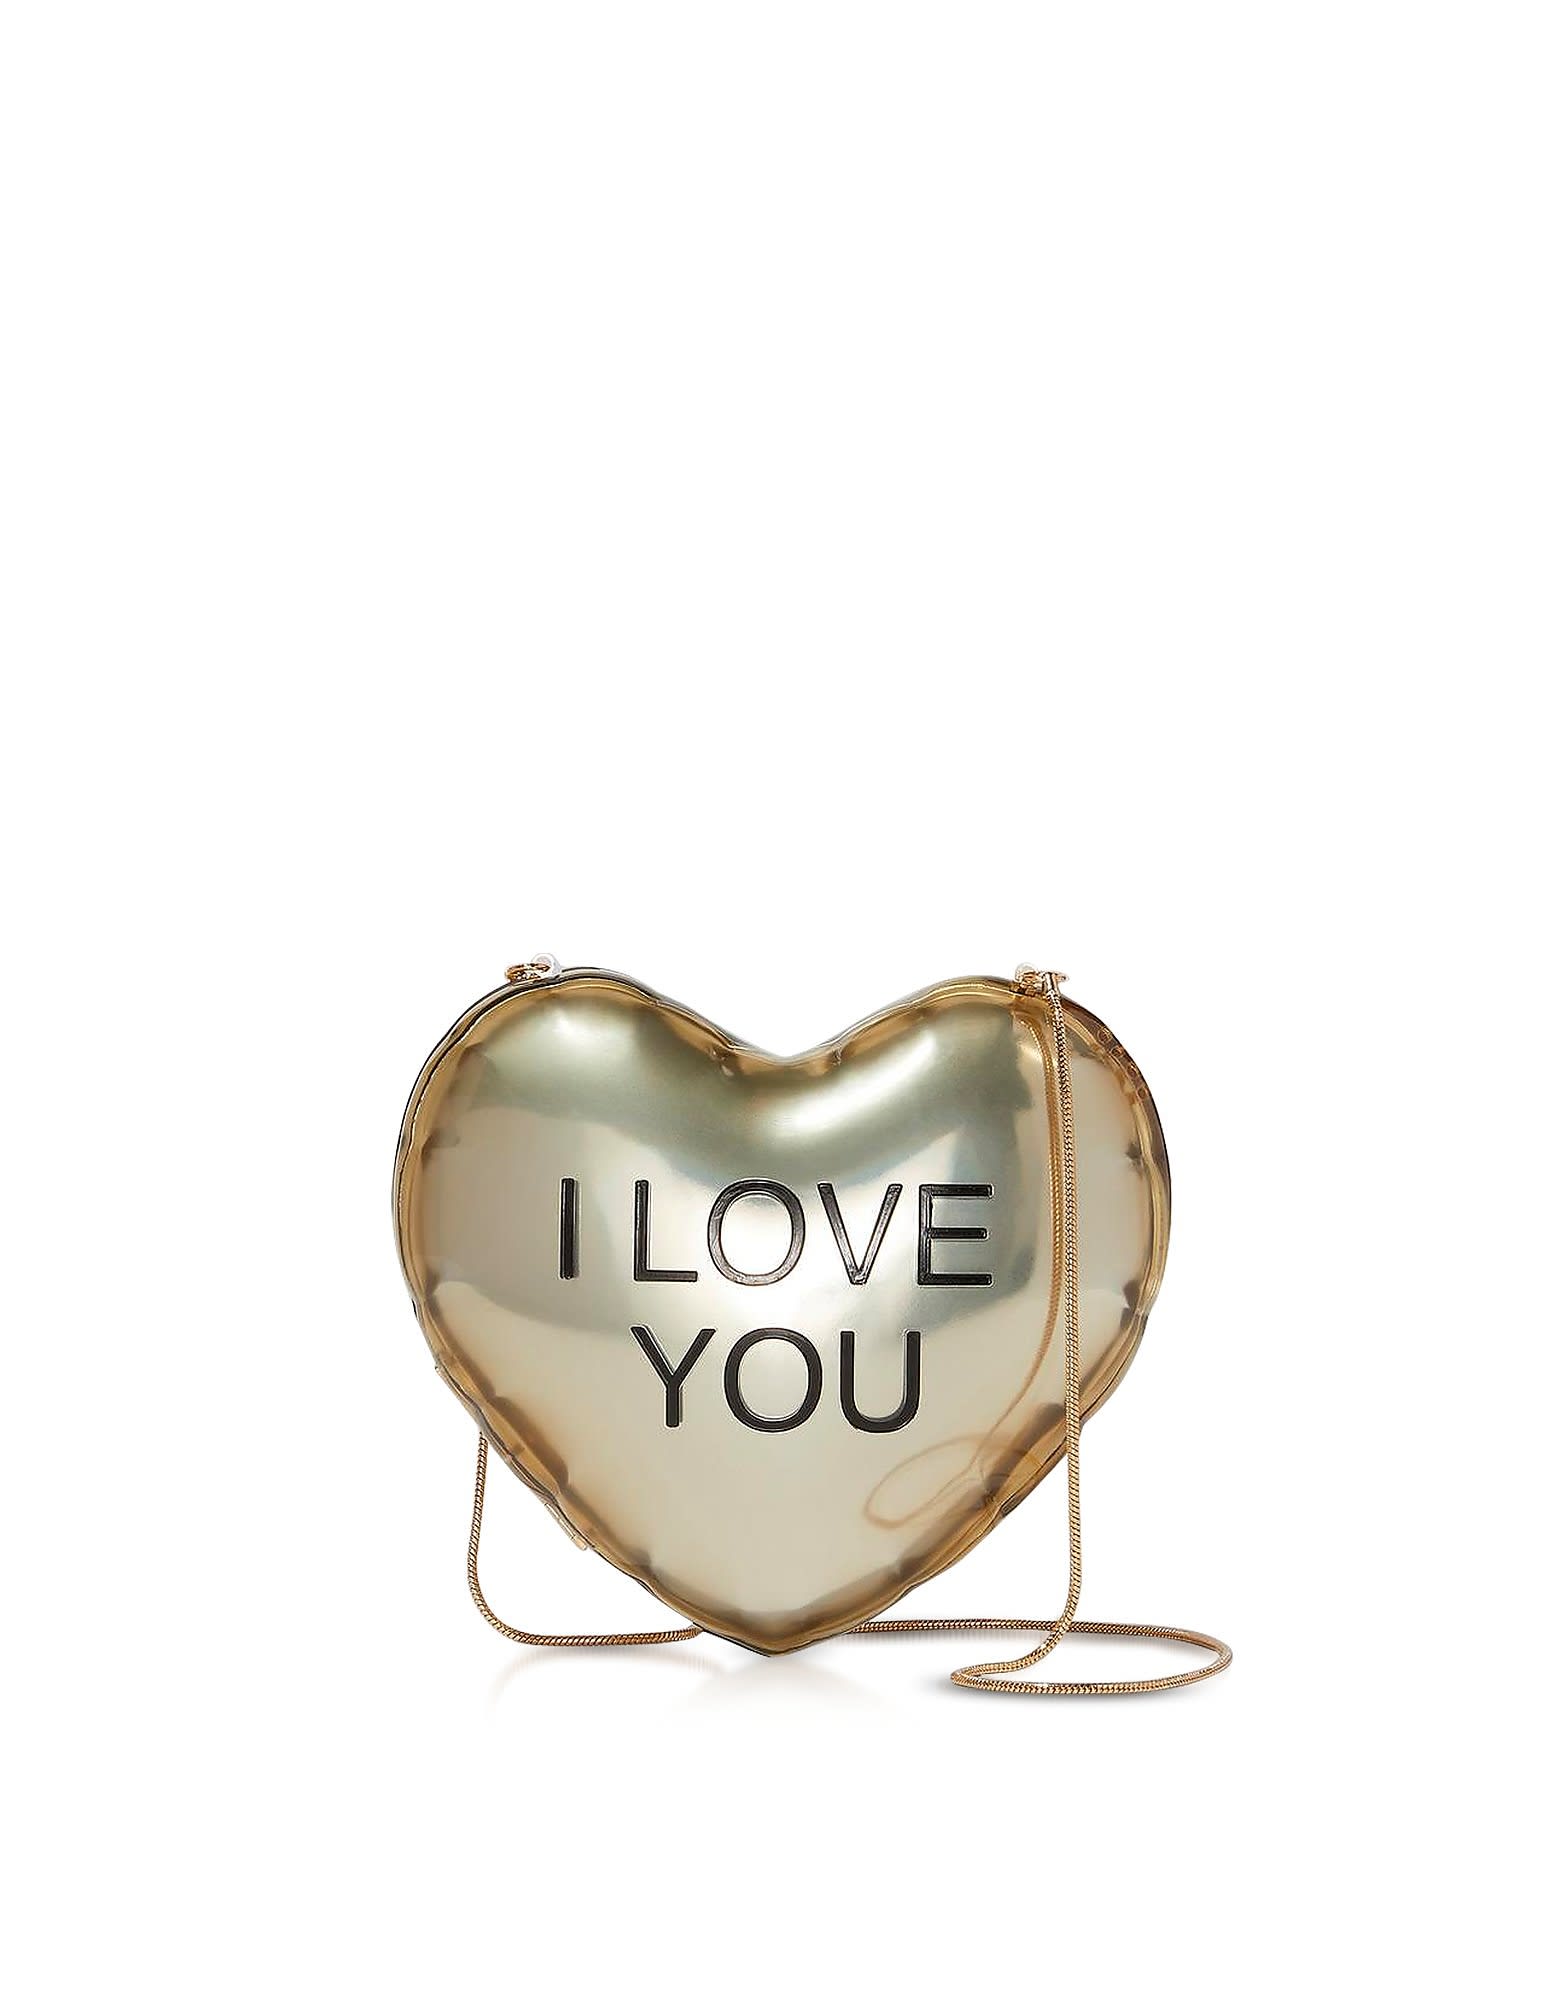 MARC JACOBS THE BALLOON MINAUDIERE GOLD PLASTIC HEART CLUTCH,11263070